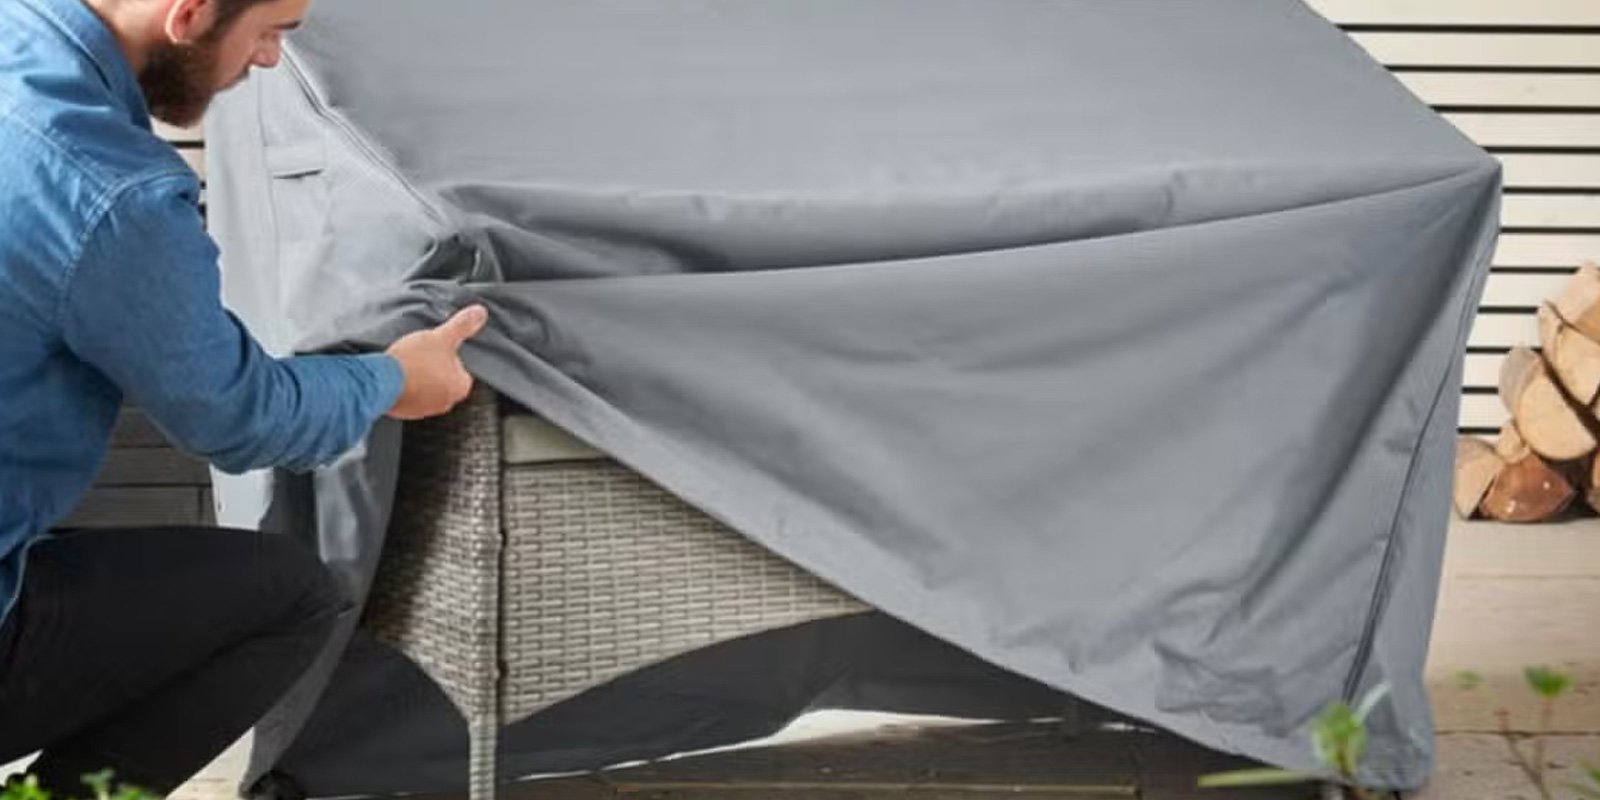 How to Attach Your Winter Cover